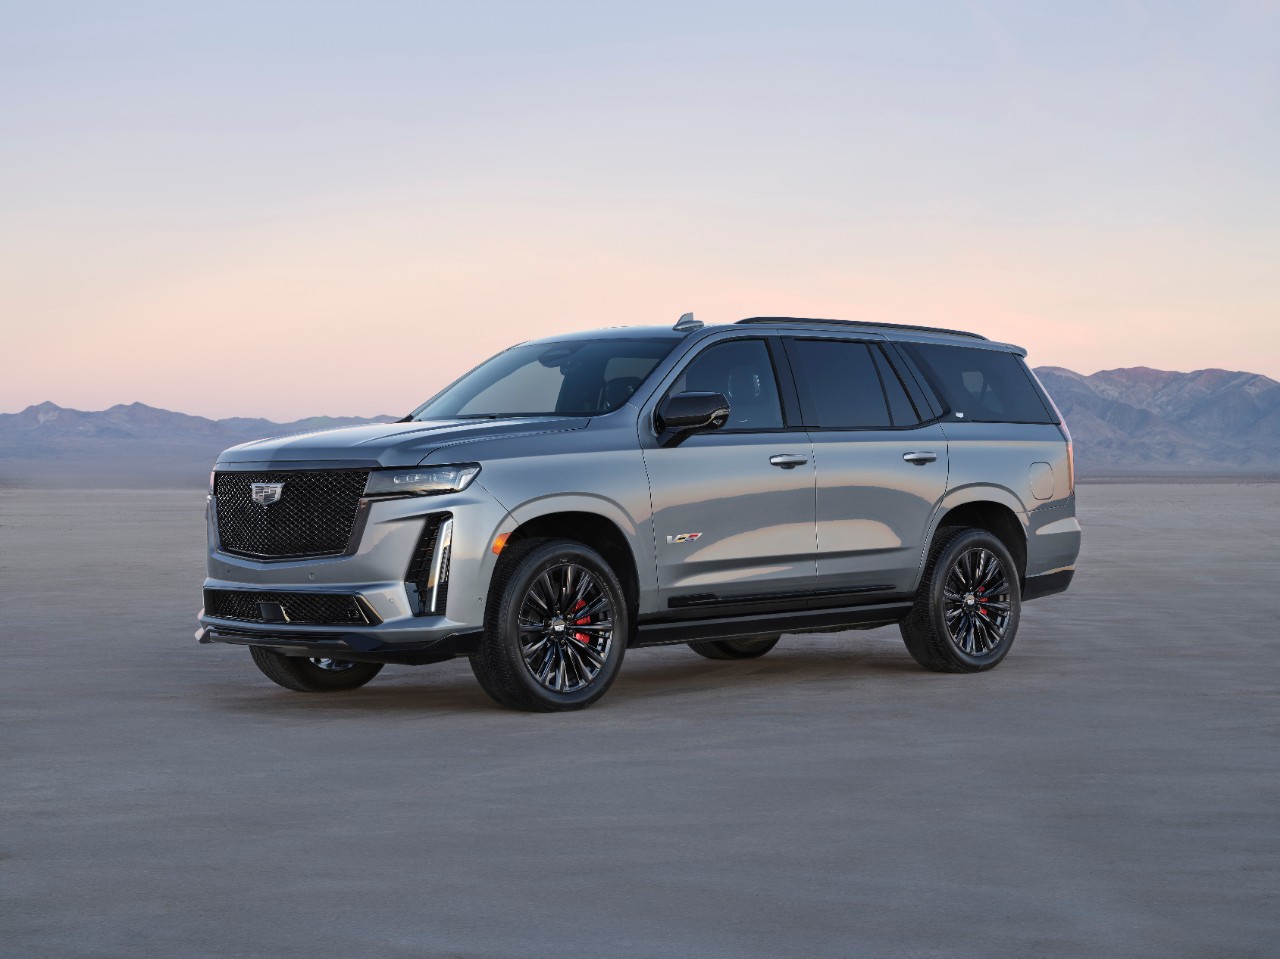 The 2023 Cadillac Escalade is powerful, plush and pricey.